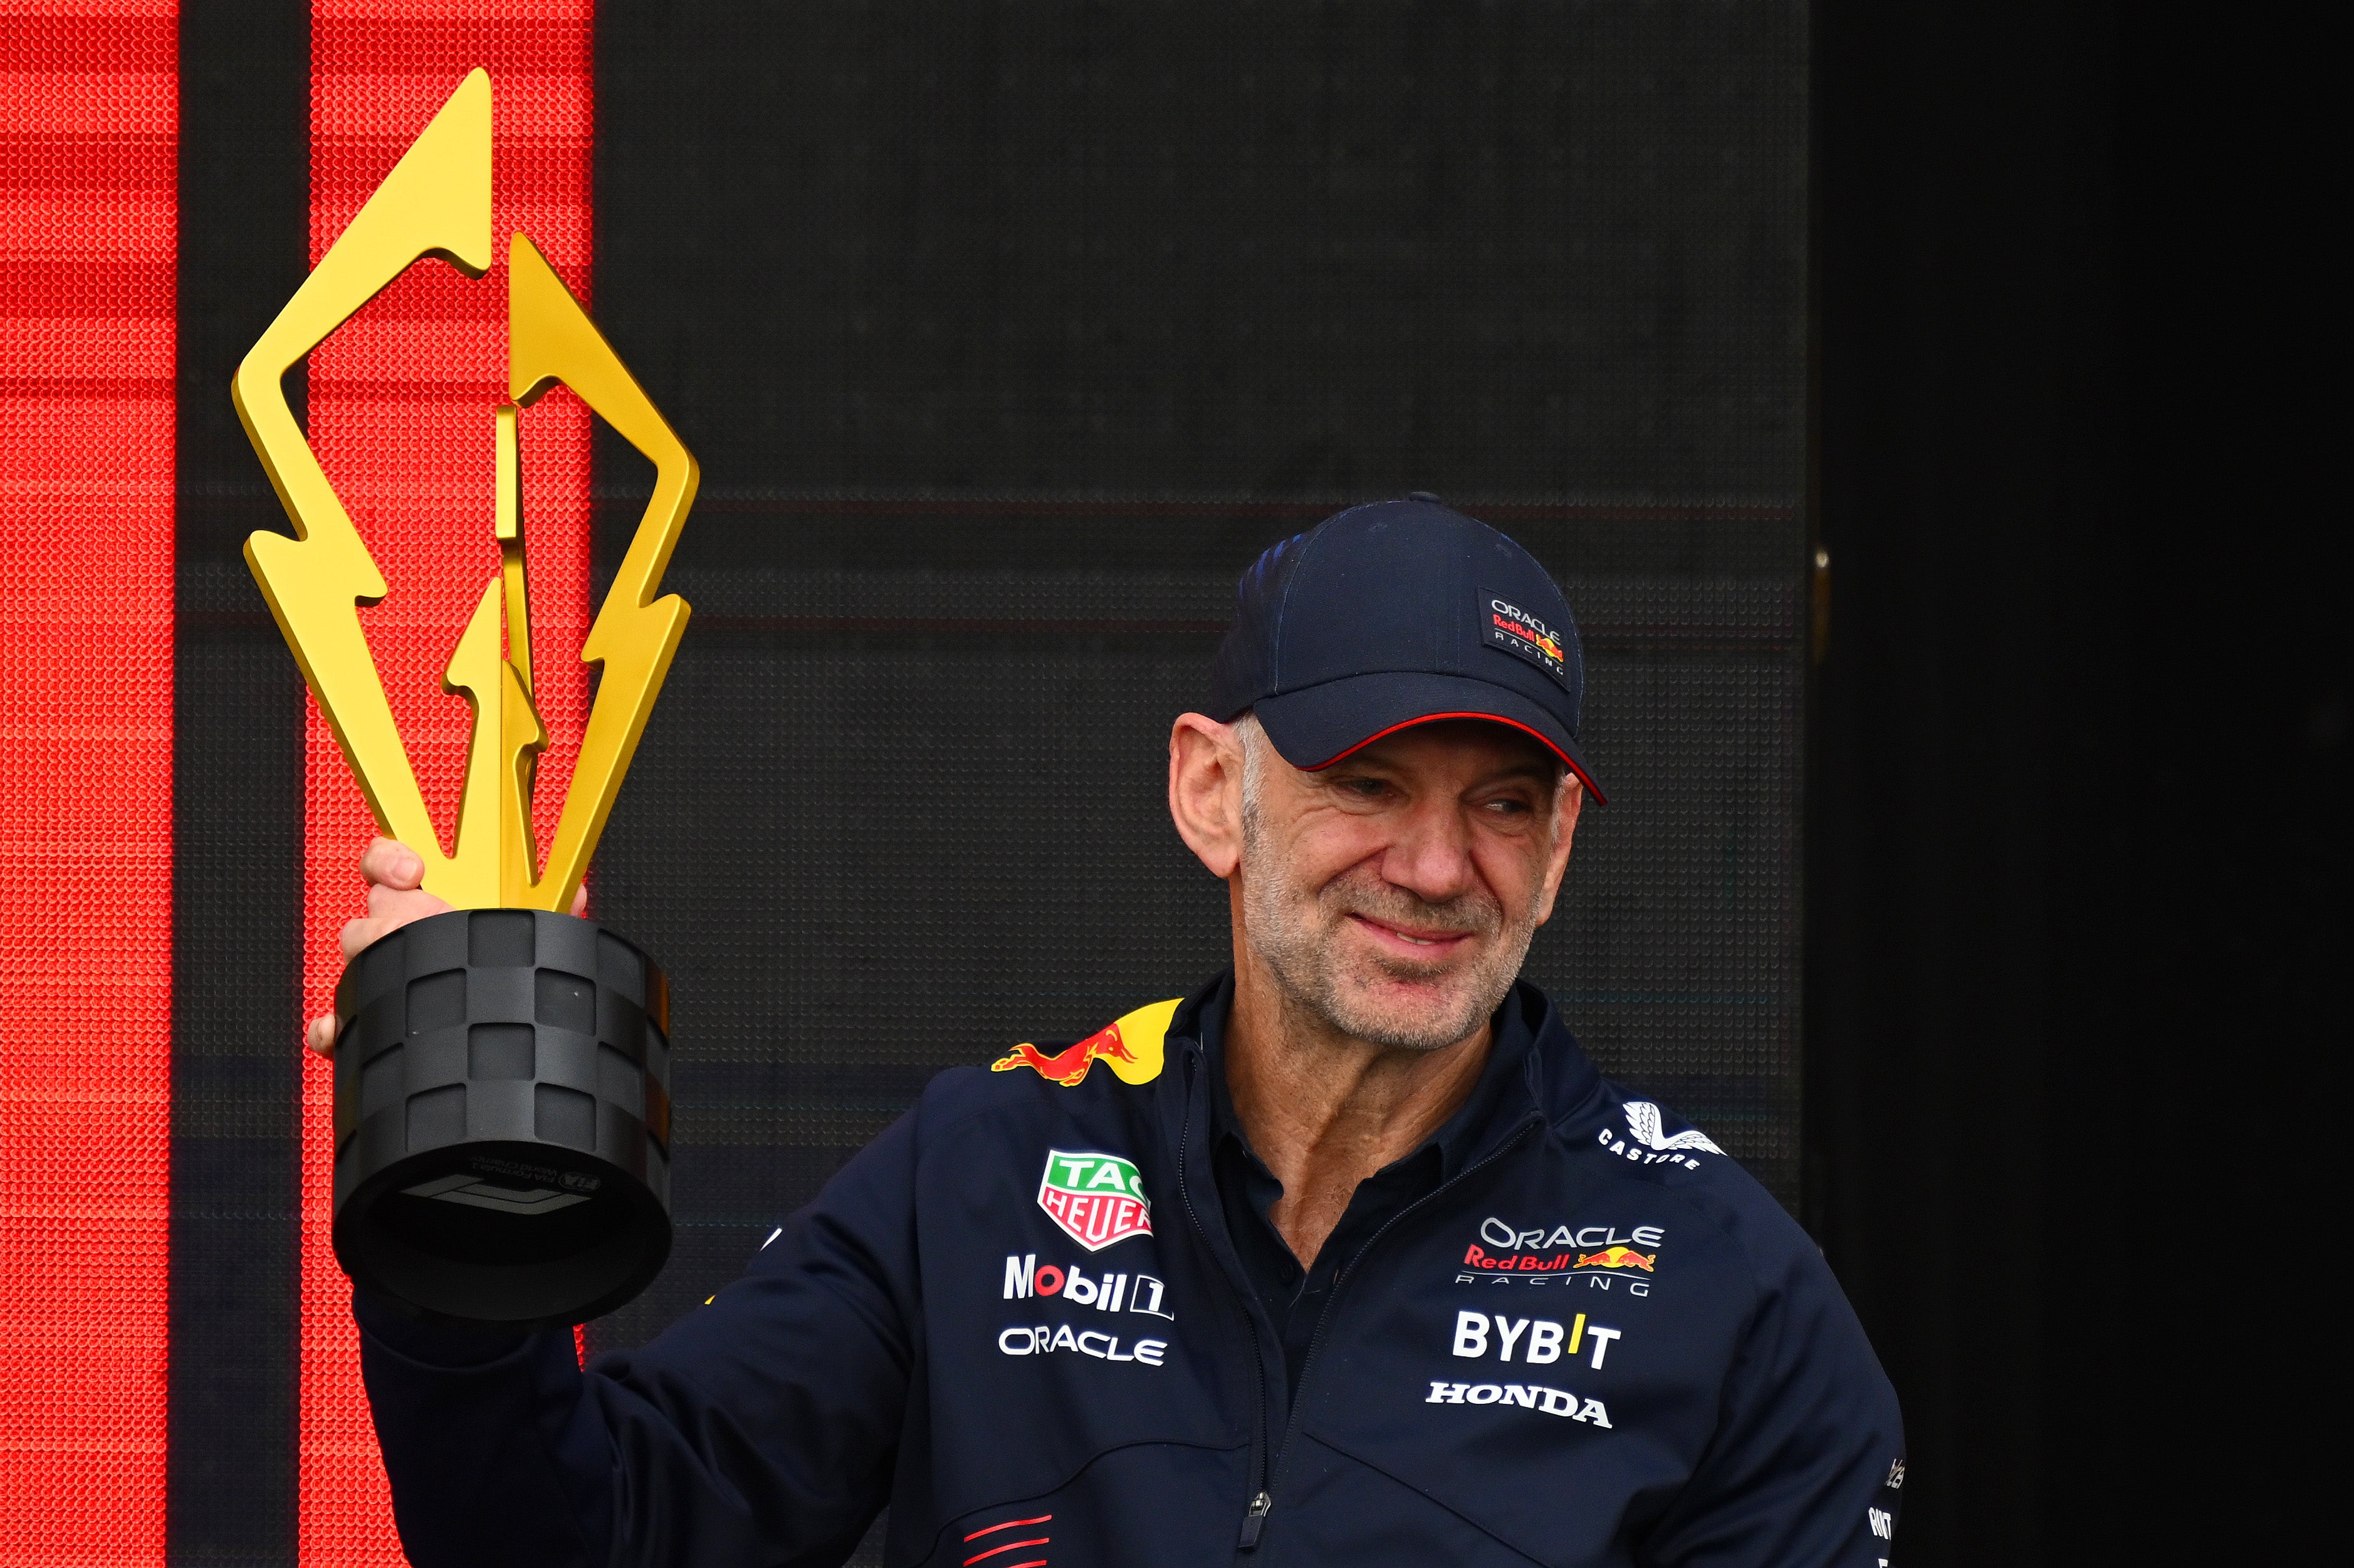 Red Bull‘s Adrian Newey has hinted at retirement in the near-future